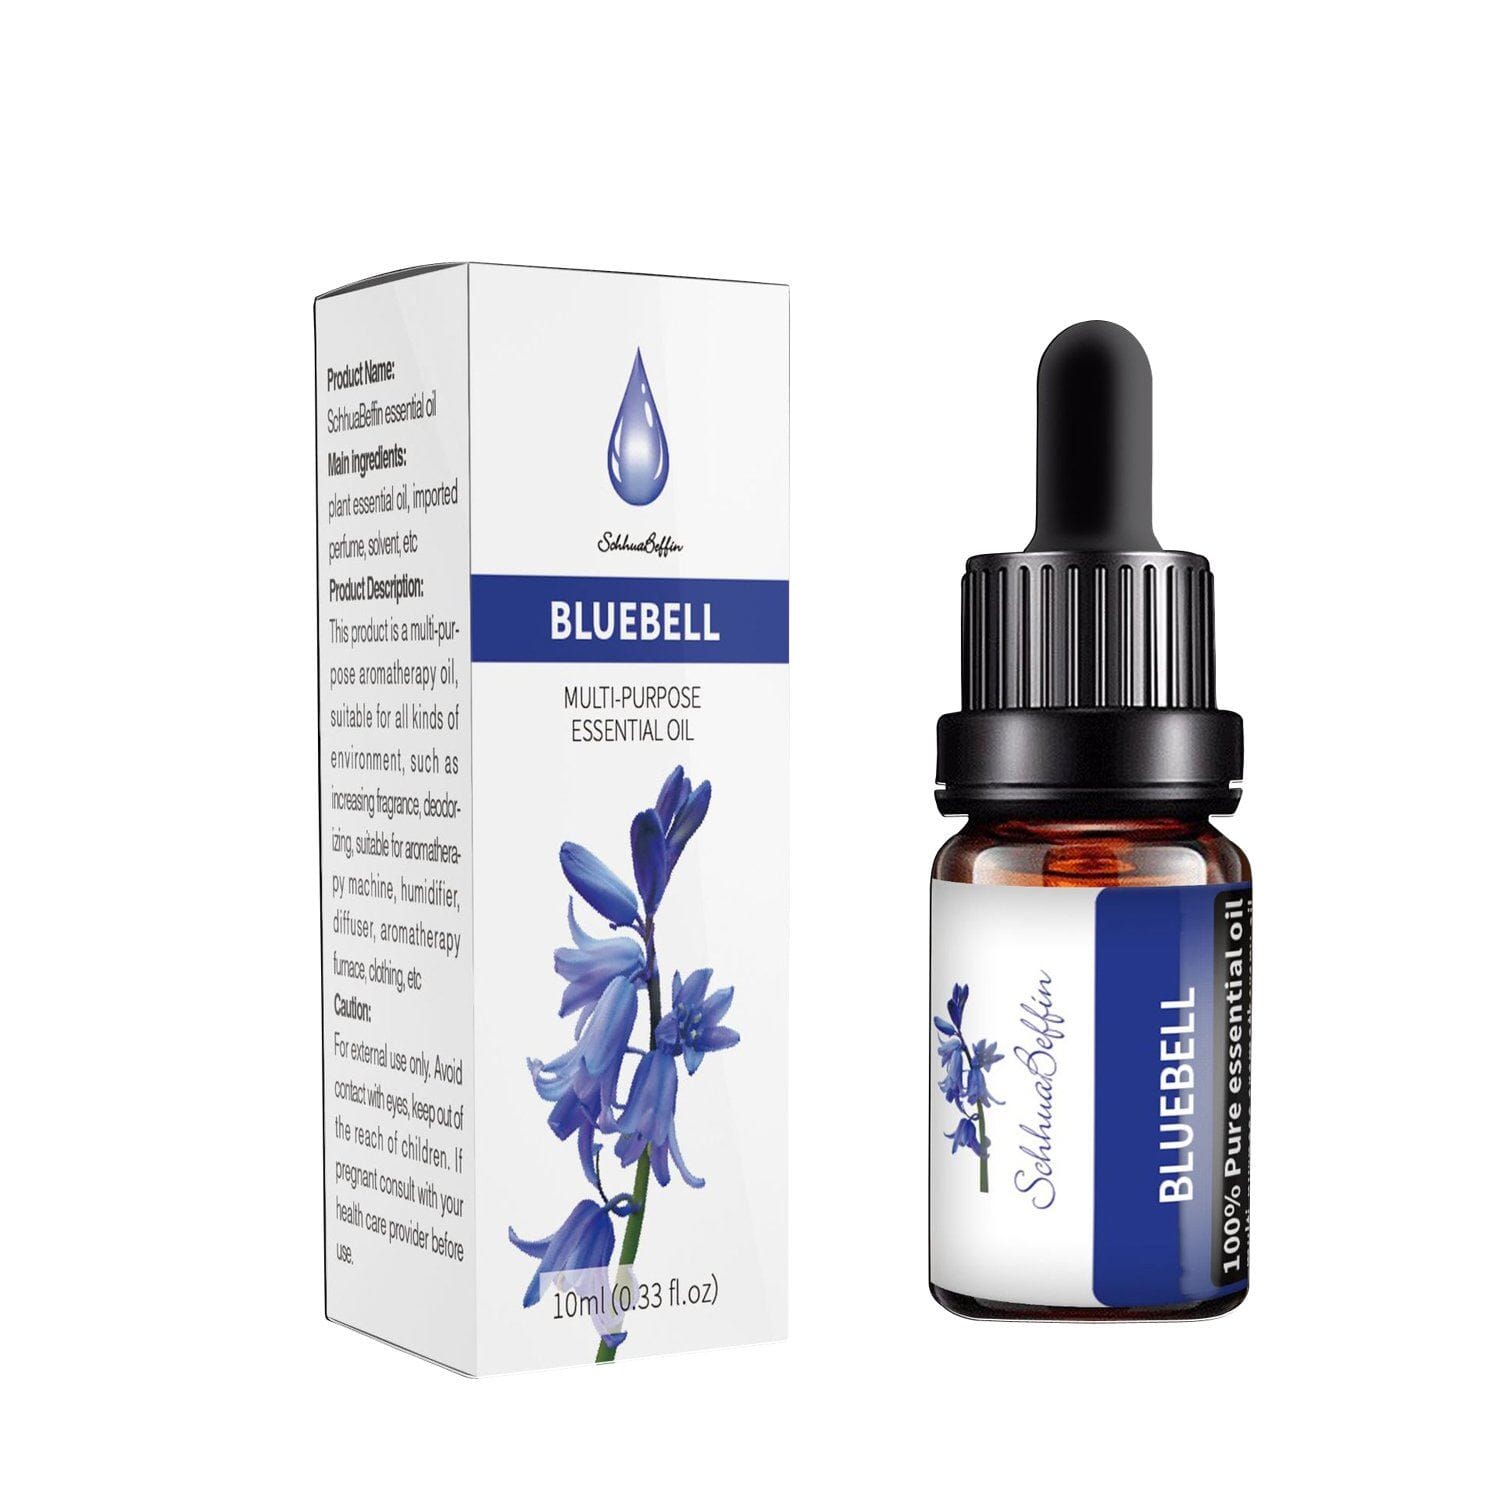 Multi-purpose 10ml Water Soluble Aromatherapy Essential Oil Default OEM Brand Bluebell 